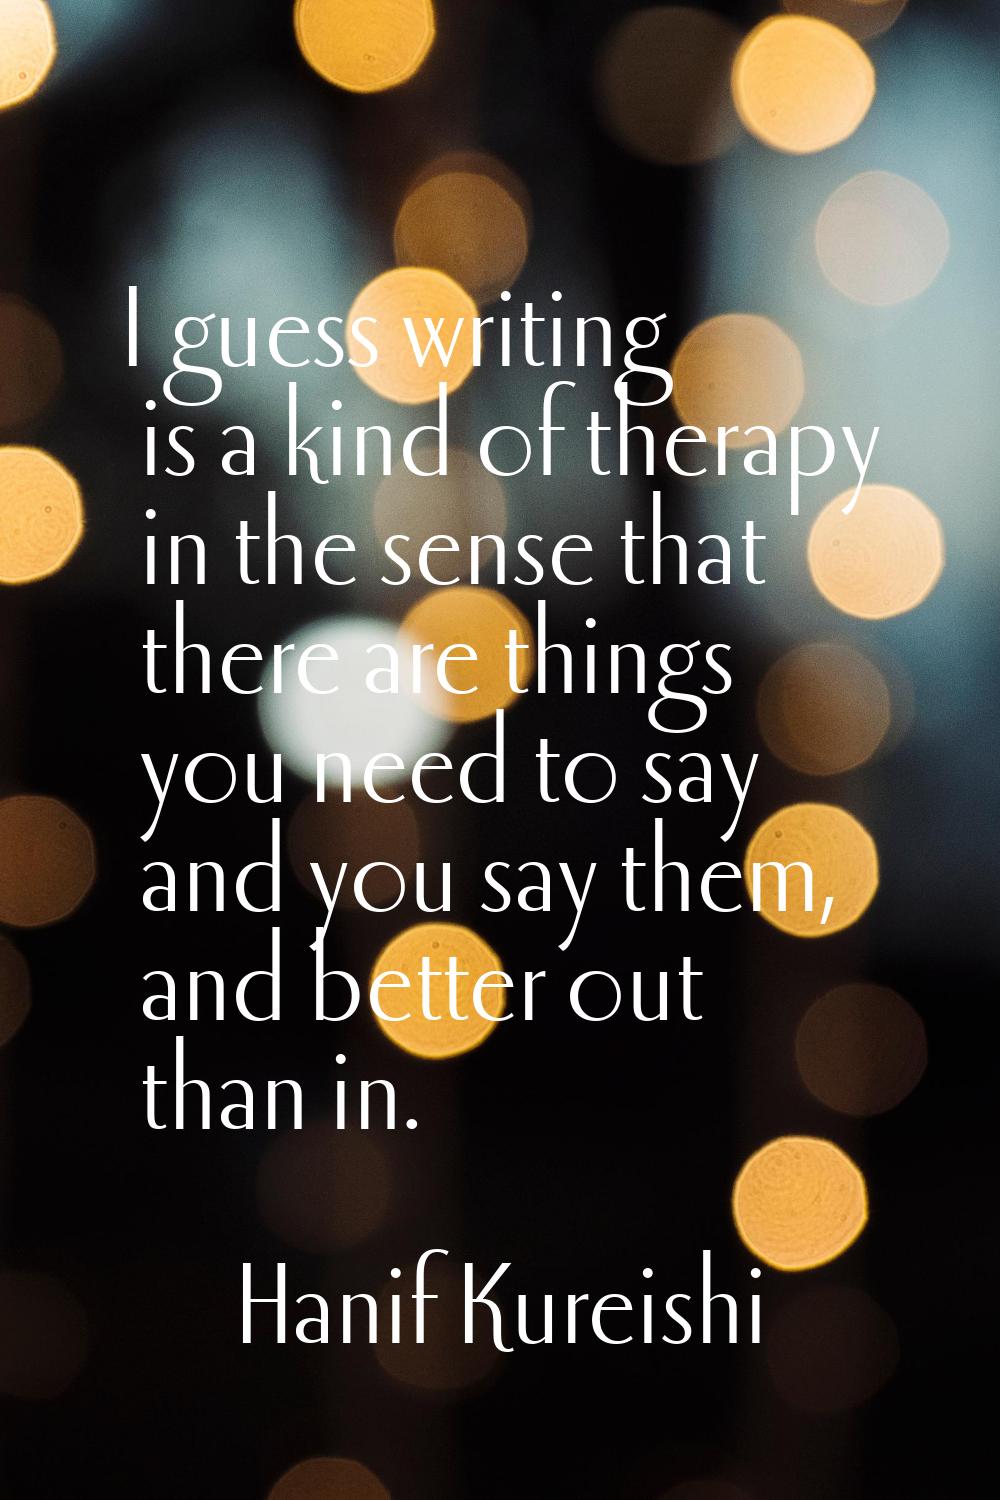 I guess writing is a kind of therapy in the sense that there are things you need to say and you say